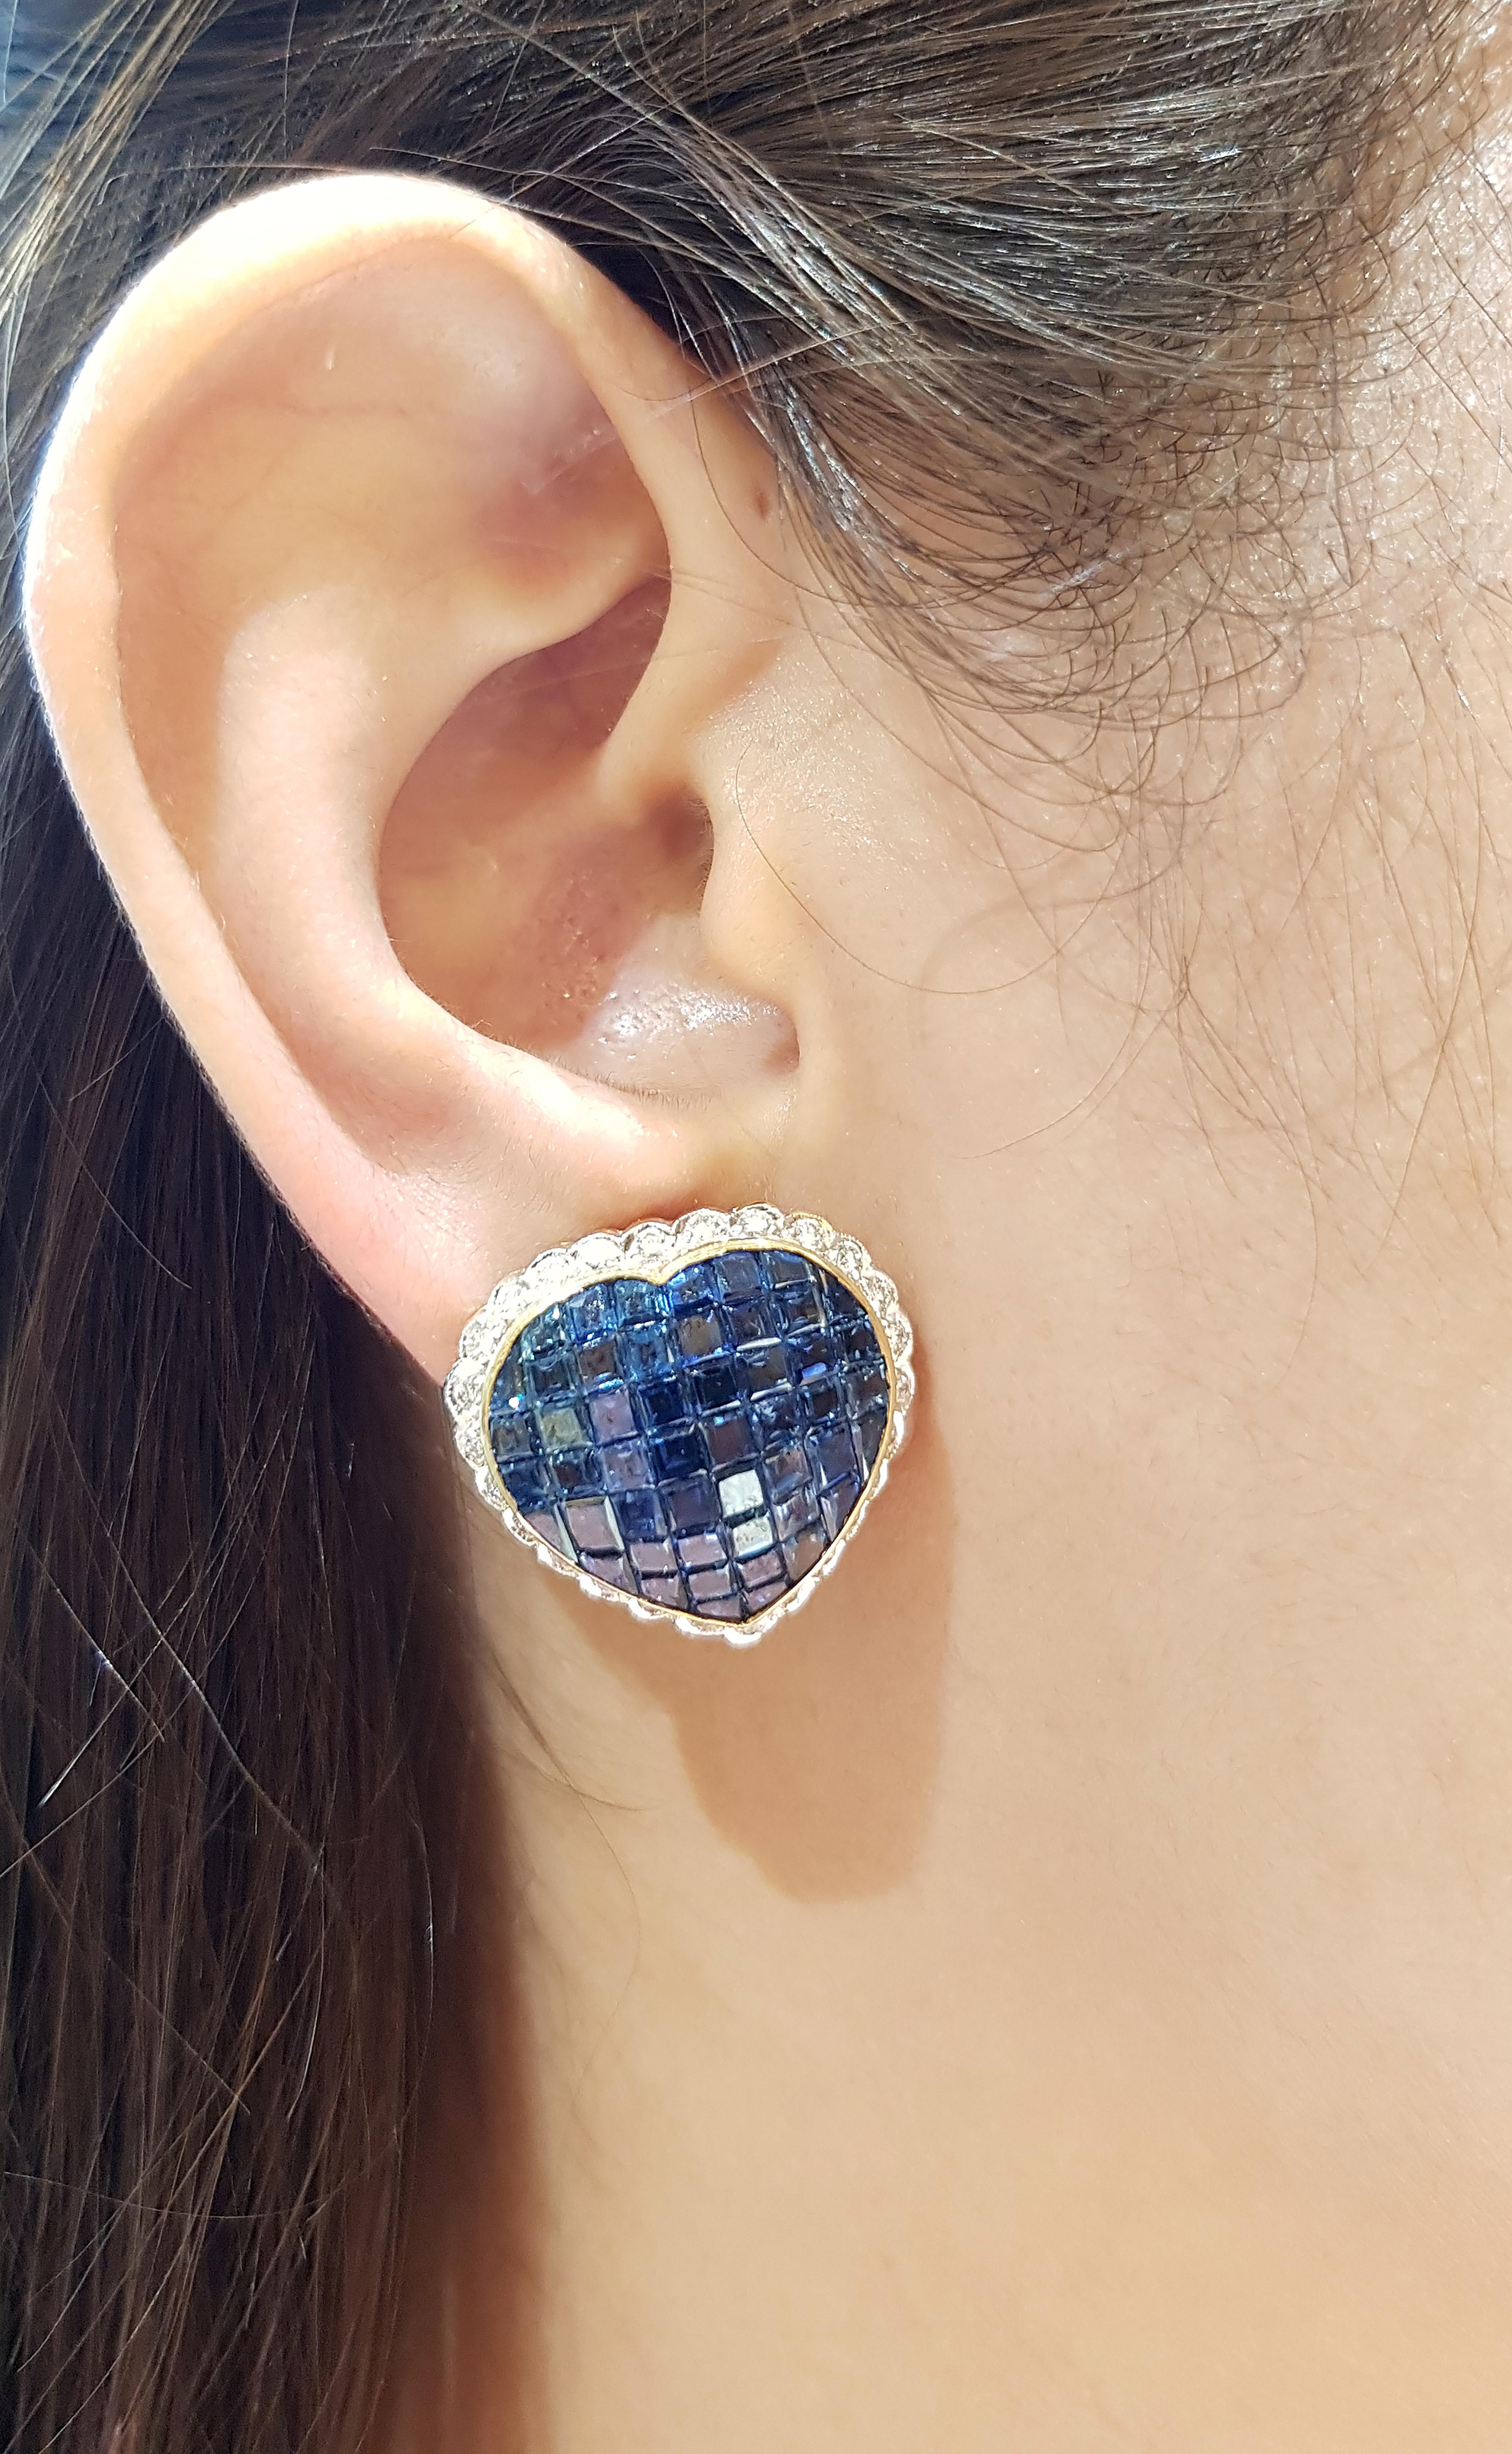 Blue Sapphire 23.64 carats with Diamond 0.75 carat Earrings set in 18 Karat Gold Settings

Width:  2.2 cm 
Length: 2.0 cm
Total Weight: 15.22 grams

